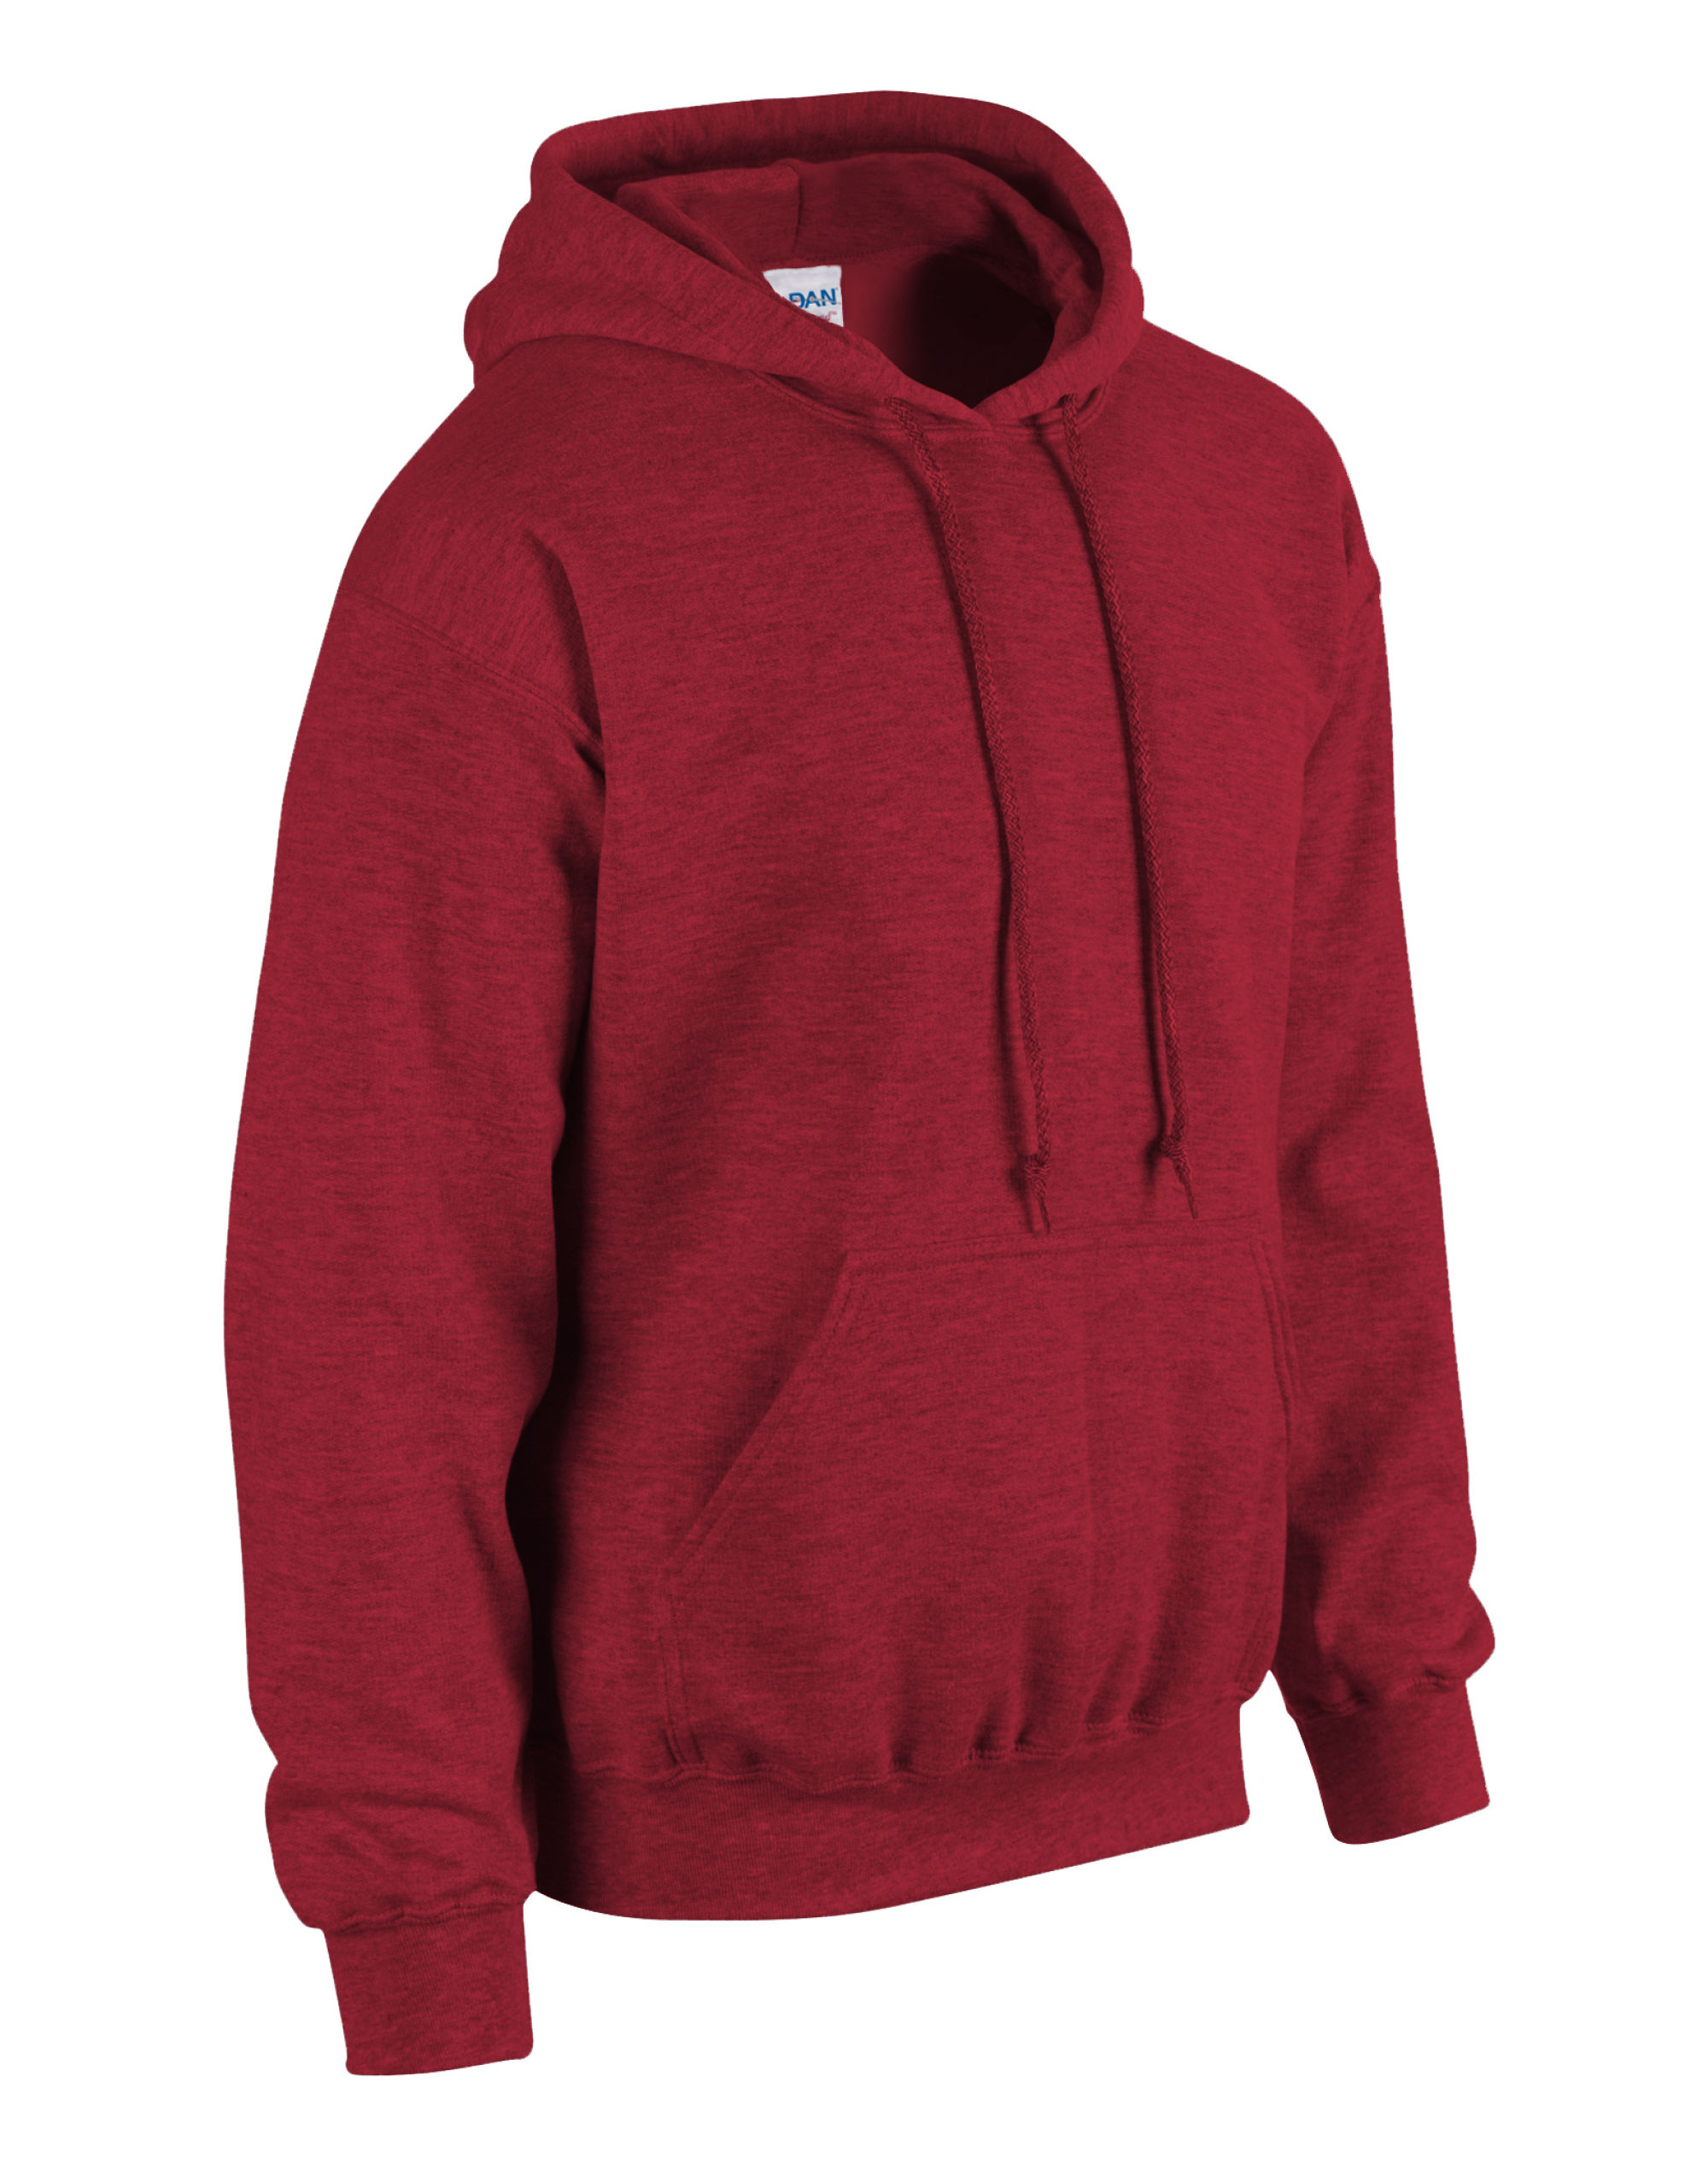 Picture of Heavy Blend™ Adult Hooded Sweatshirt